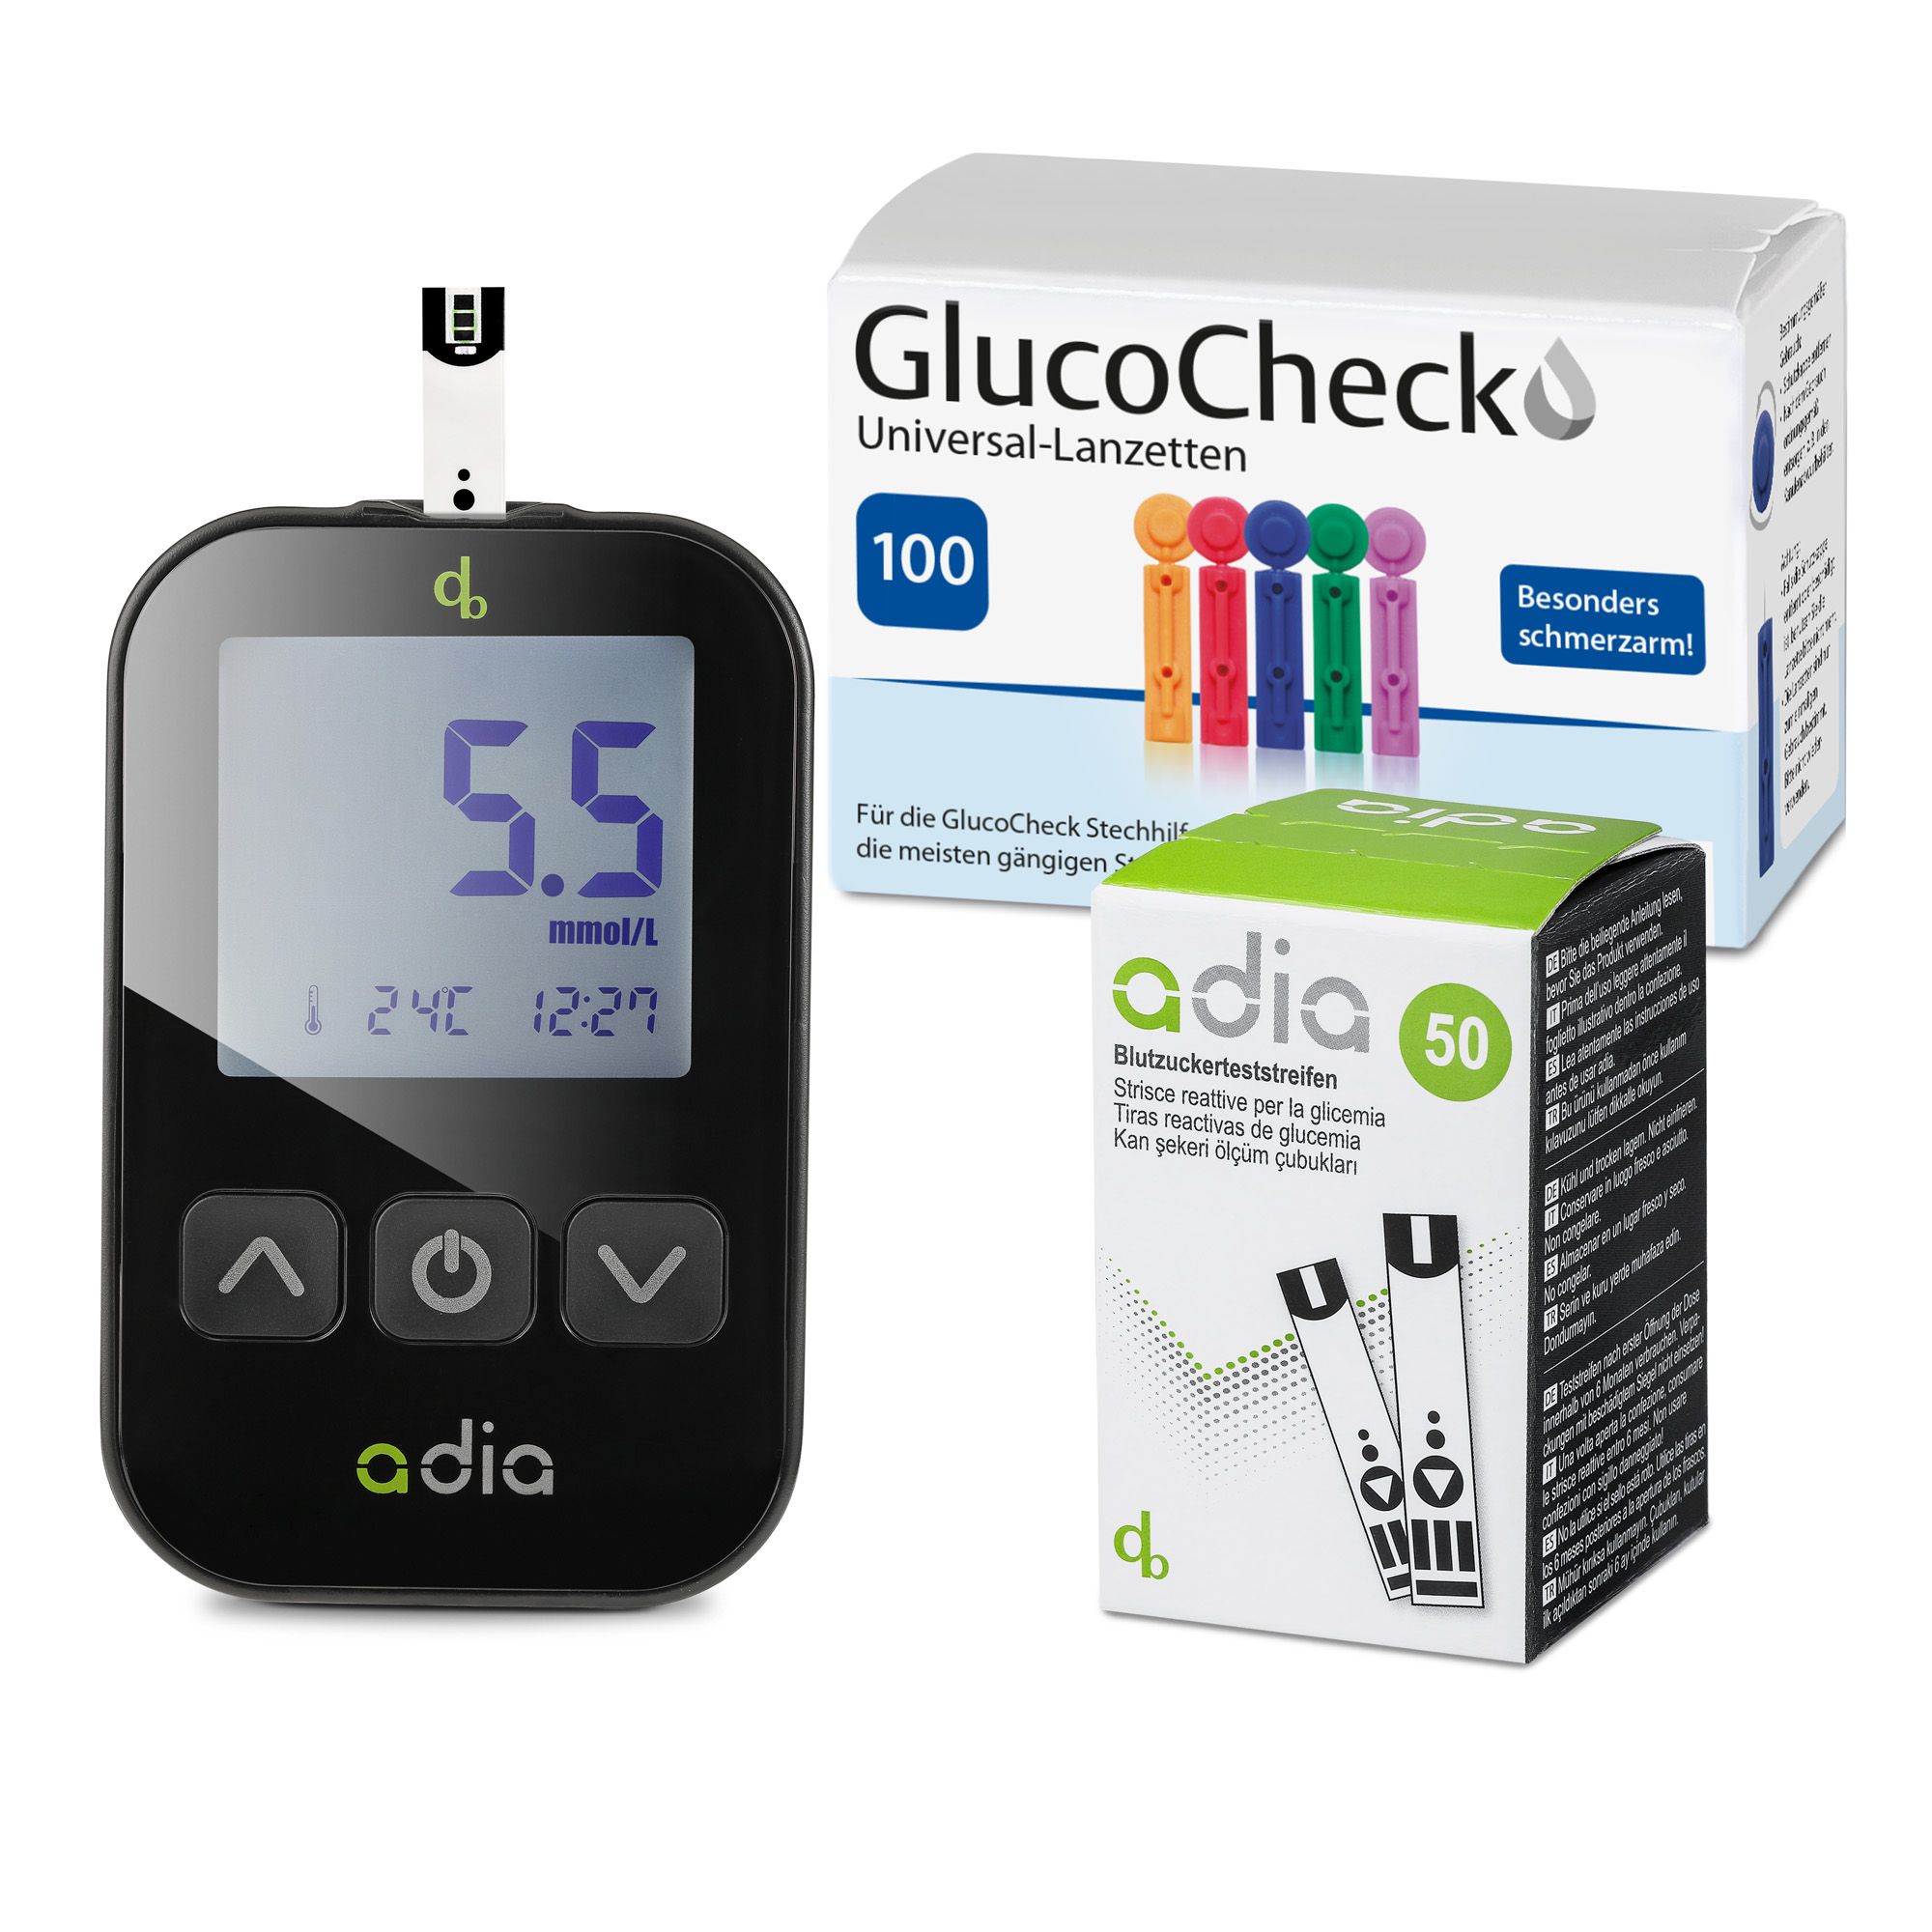 Adia blood sugar test strips (60 pieces) with measuring device (MMOL/L) and 110 Lanzetten as a complete set